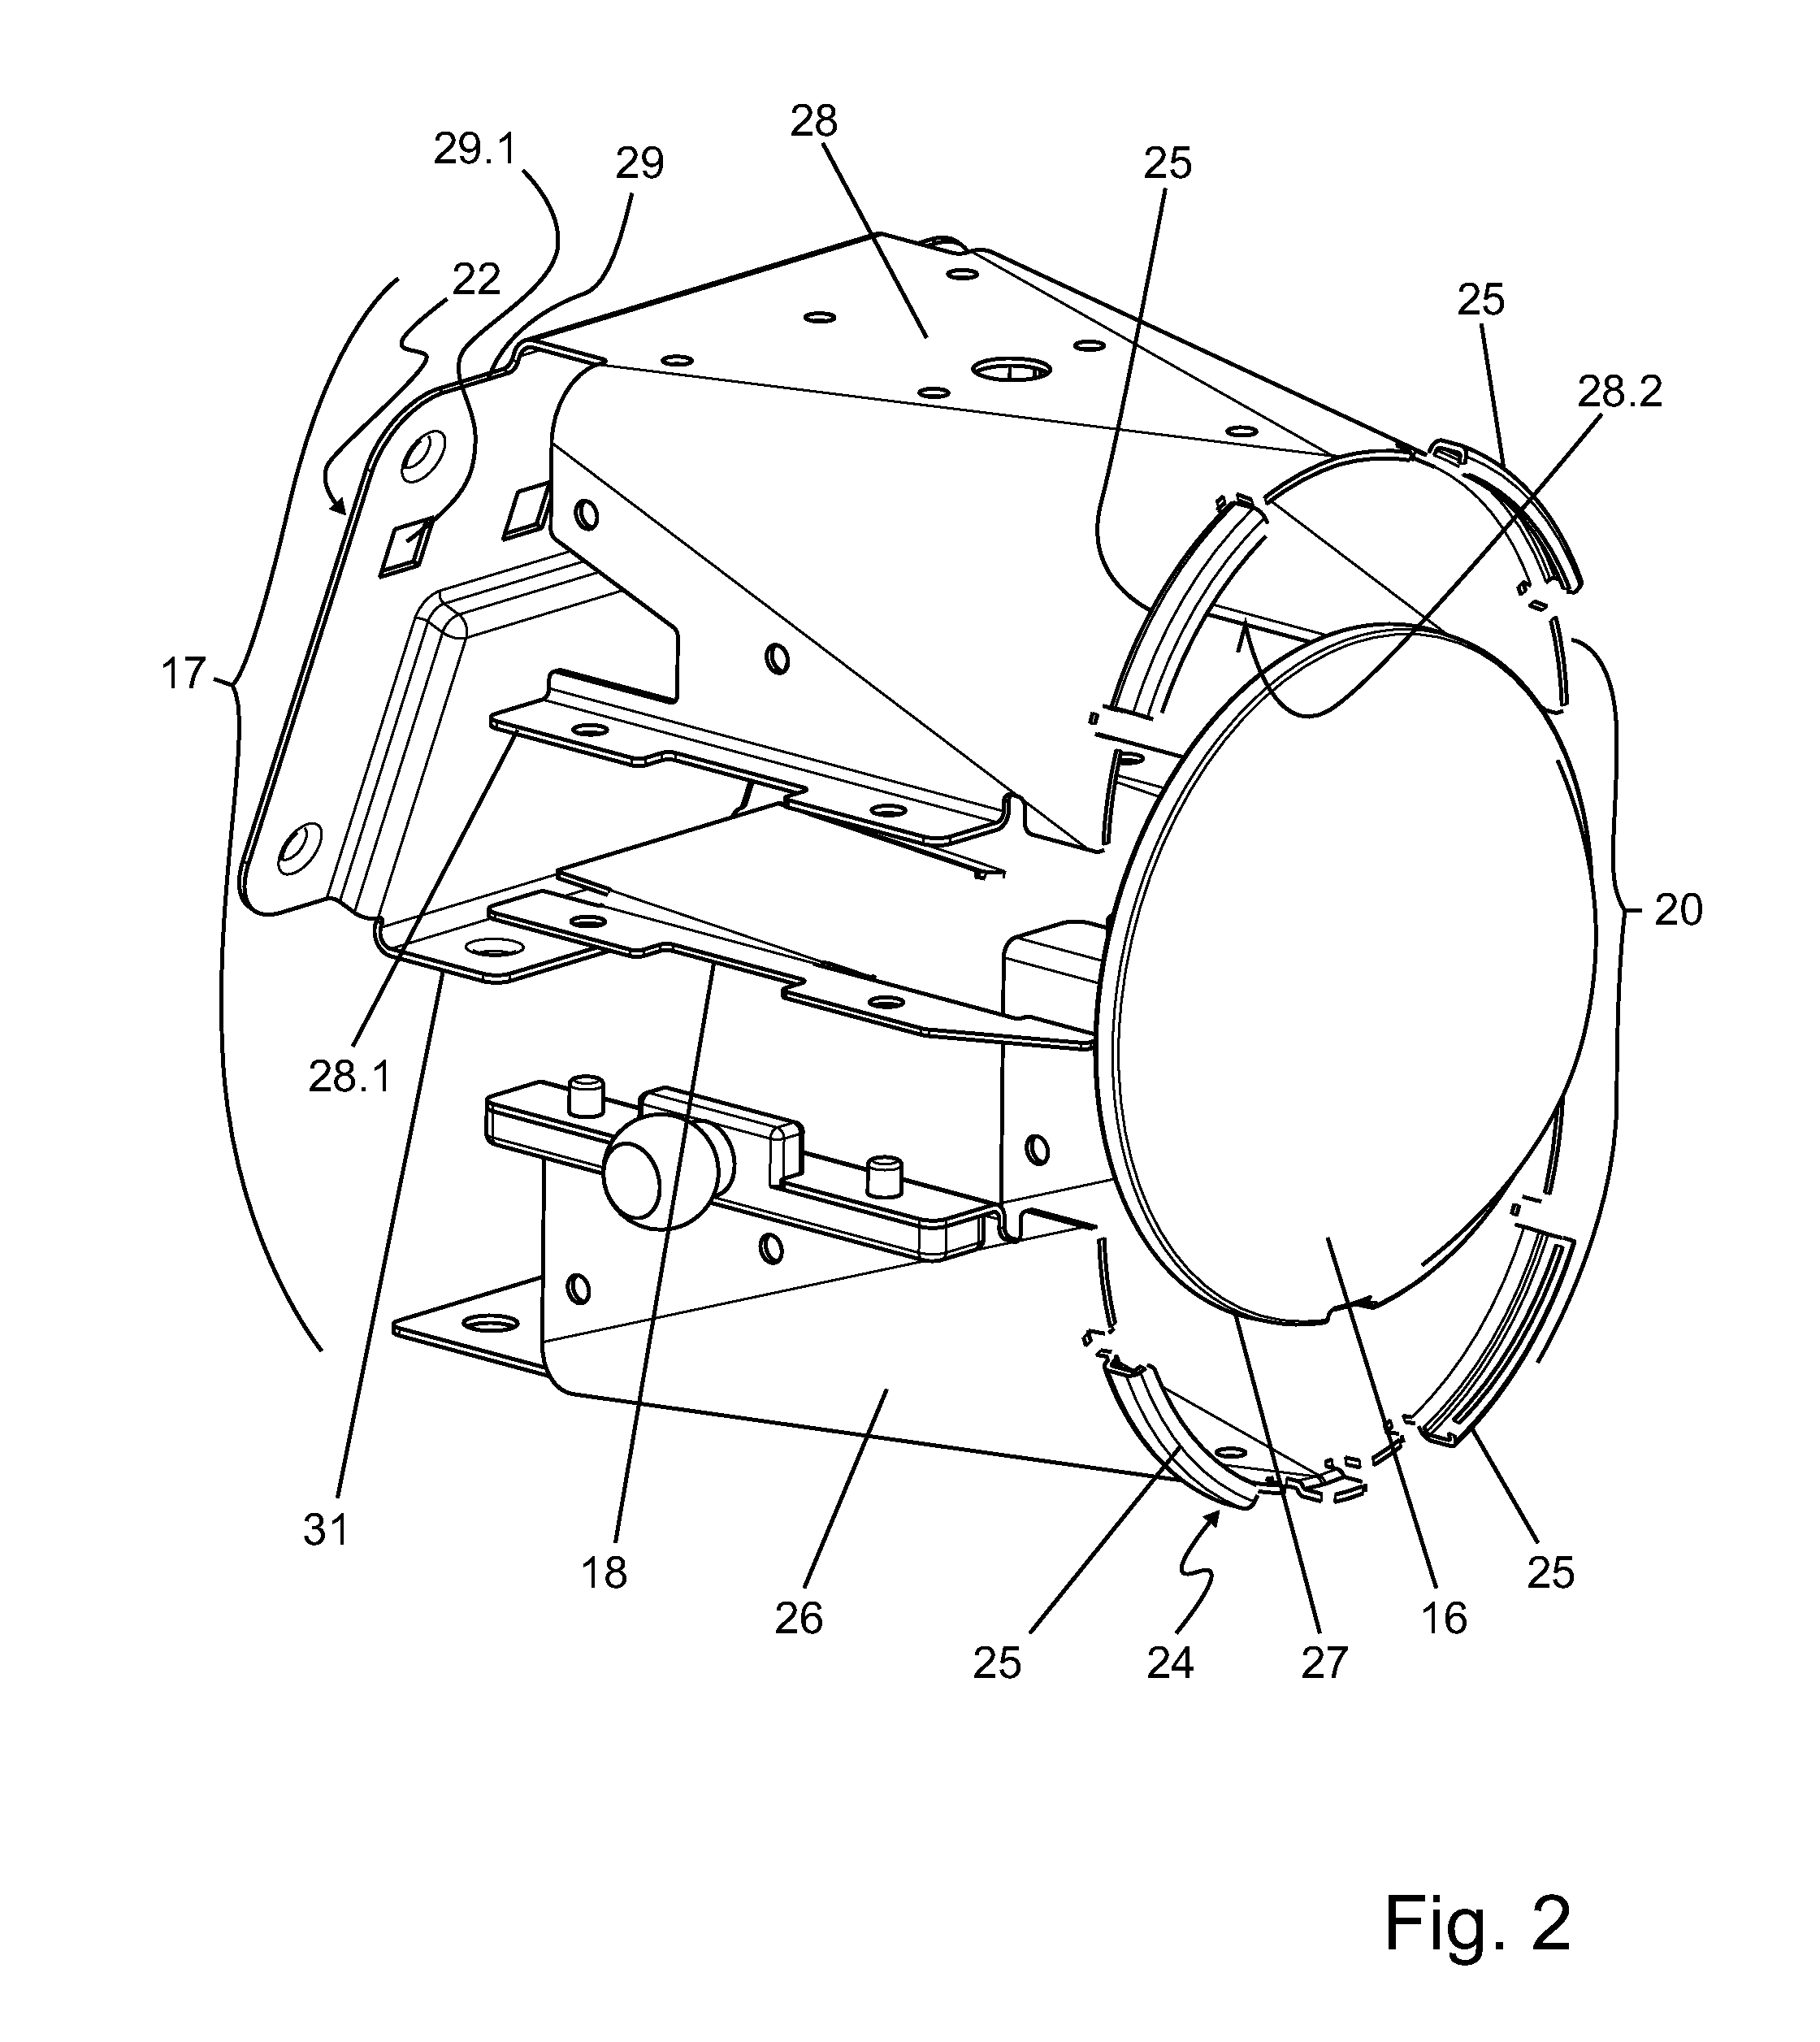 Projection light module for a motor vehicle headlamp having a central lens mount